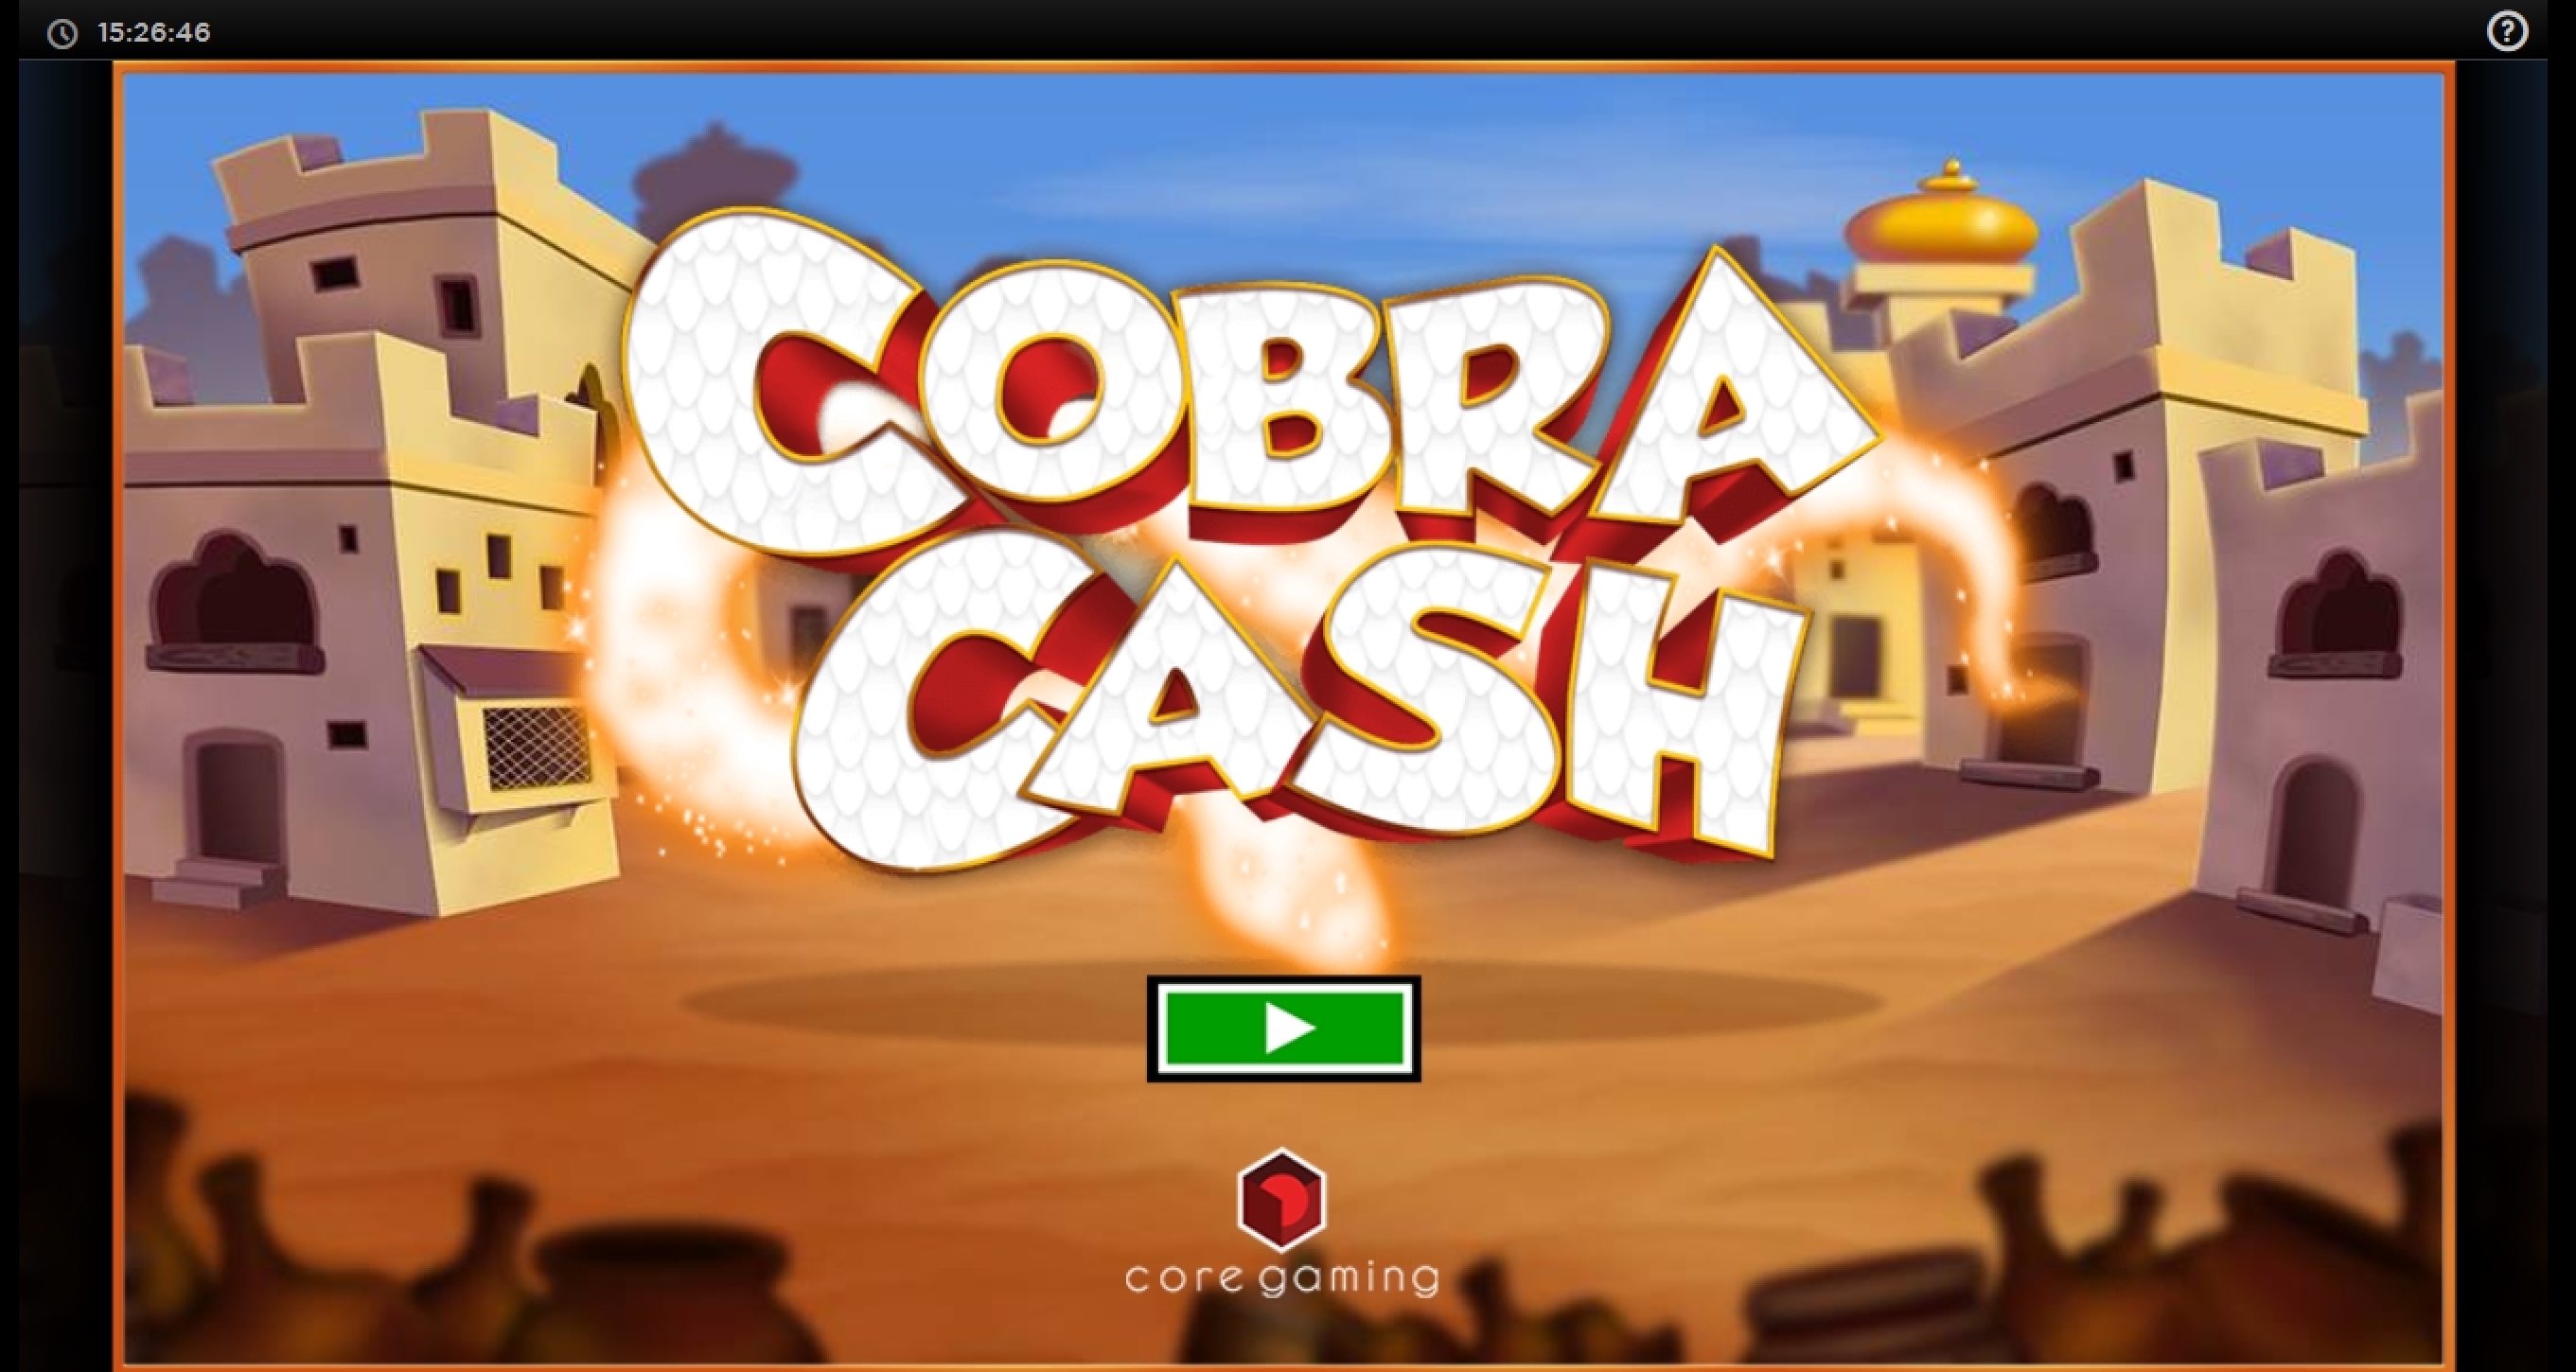 Play Cobra Cash Free Casino Slot Game by CORE Gaming